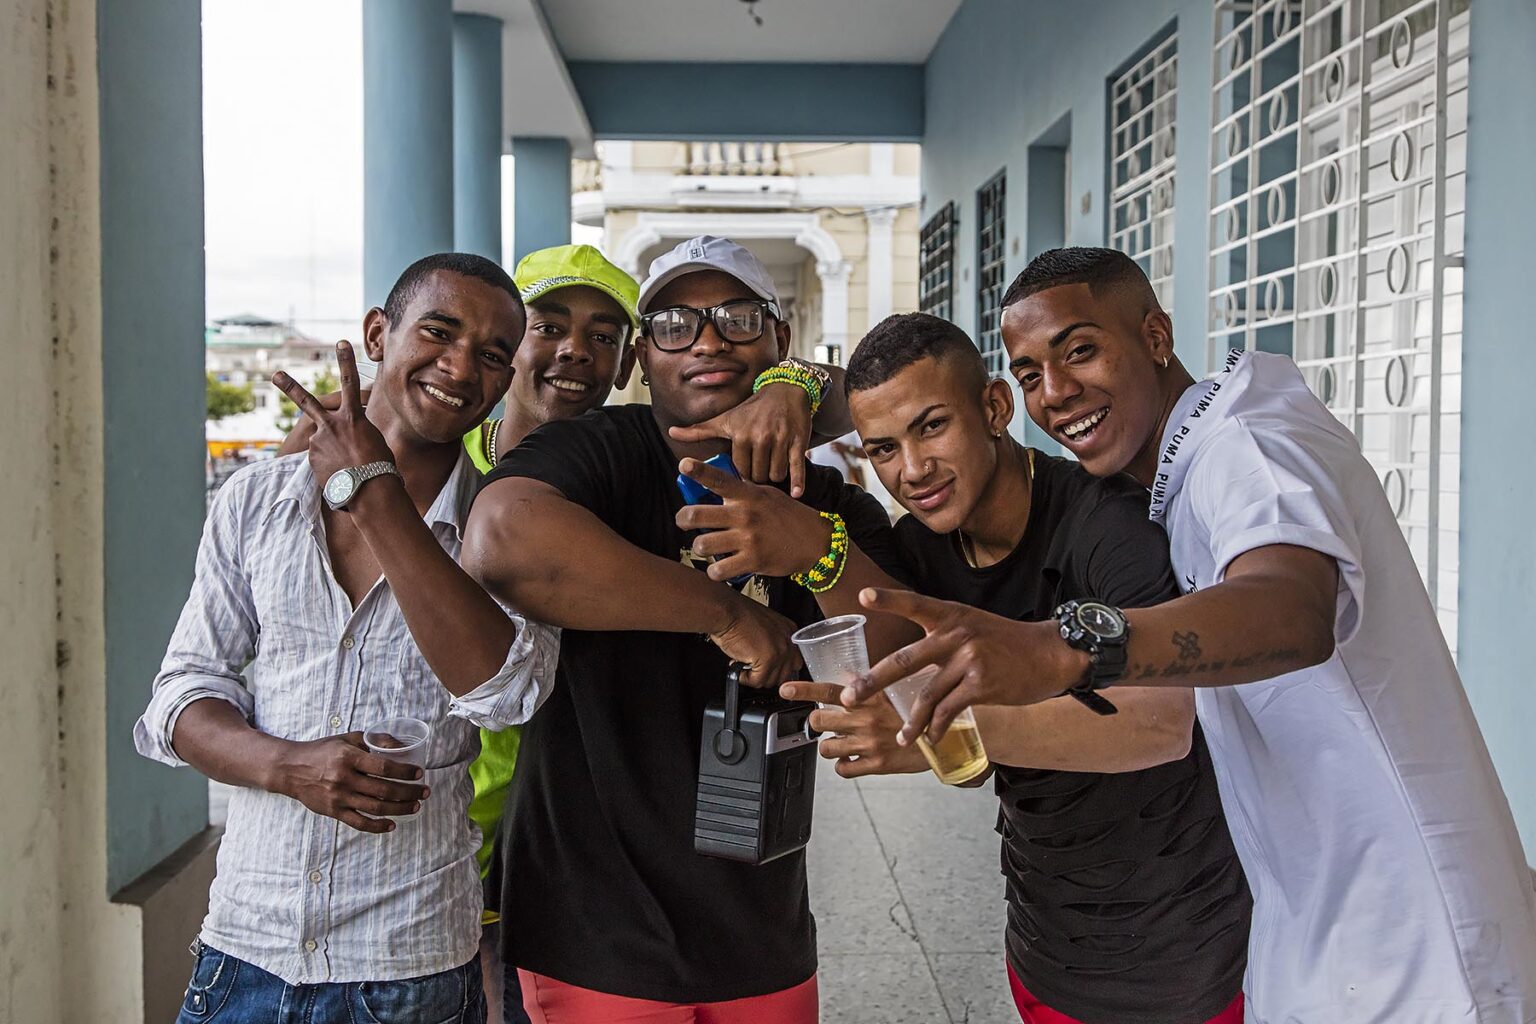 Young Cubans have fun and party downtown - CIENFUEGOS, CUBA